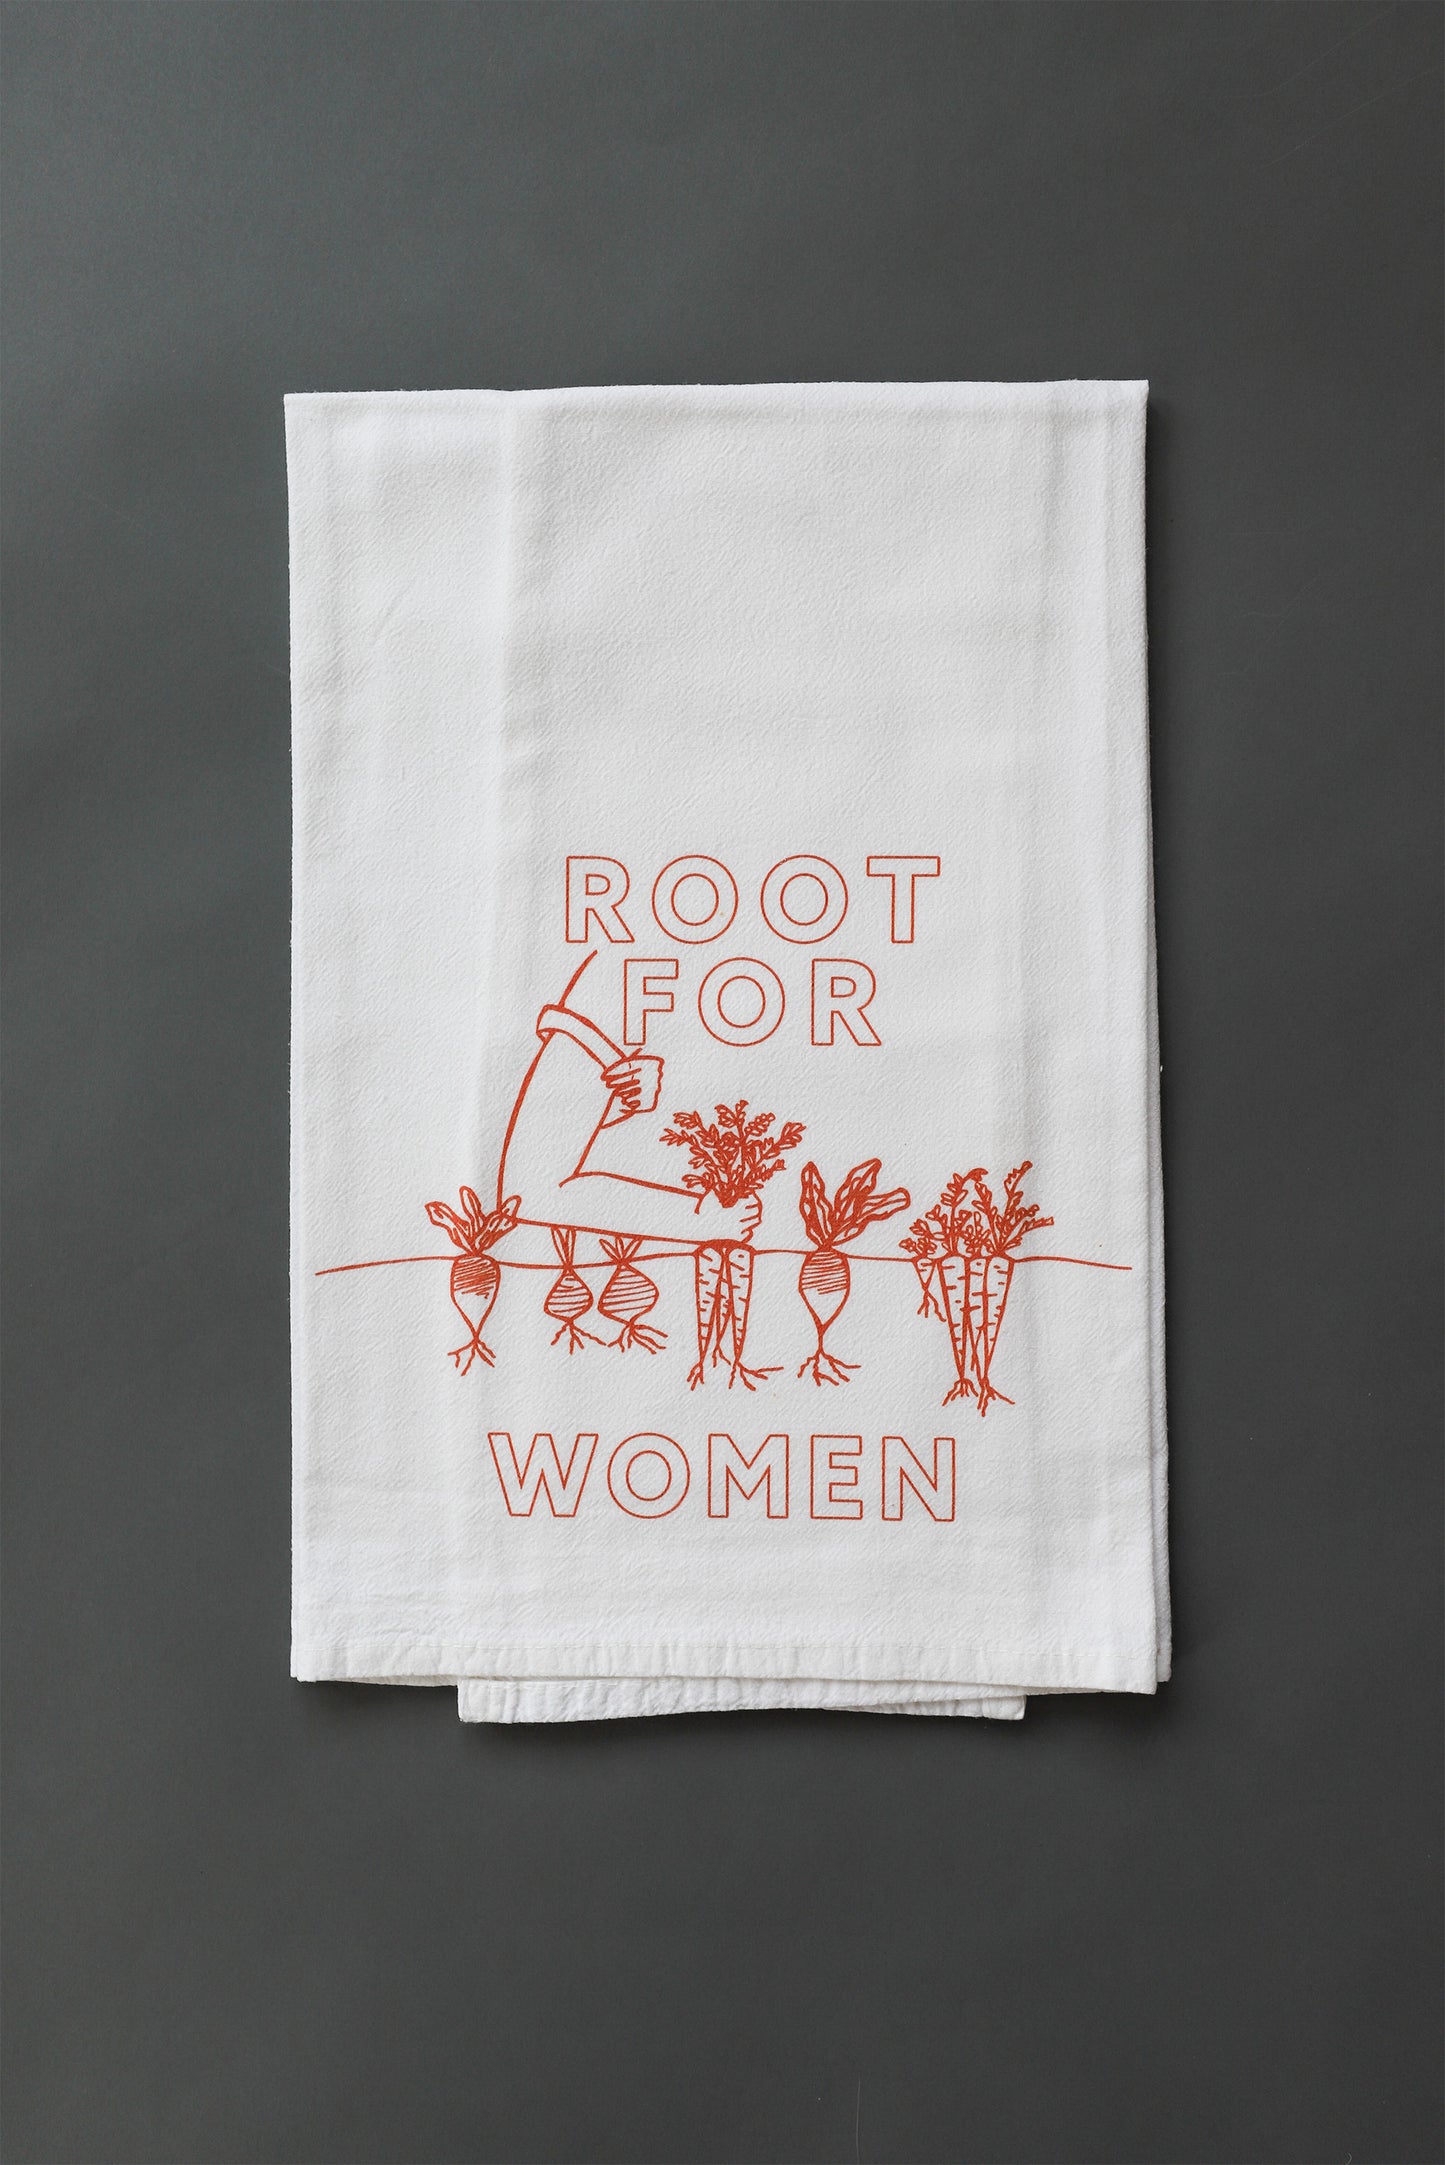 A white tea towel with red block letters that read "Root for Woman" and a garden illustration 